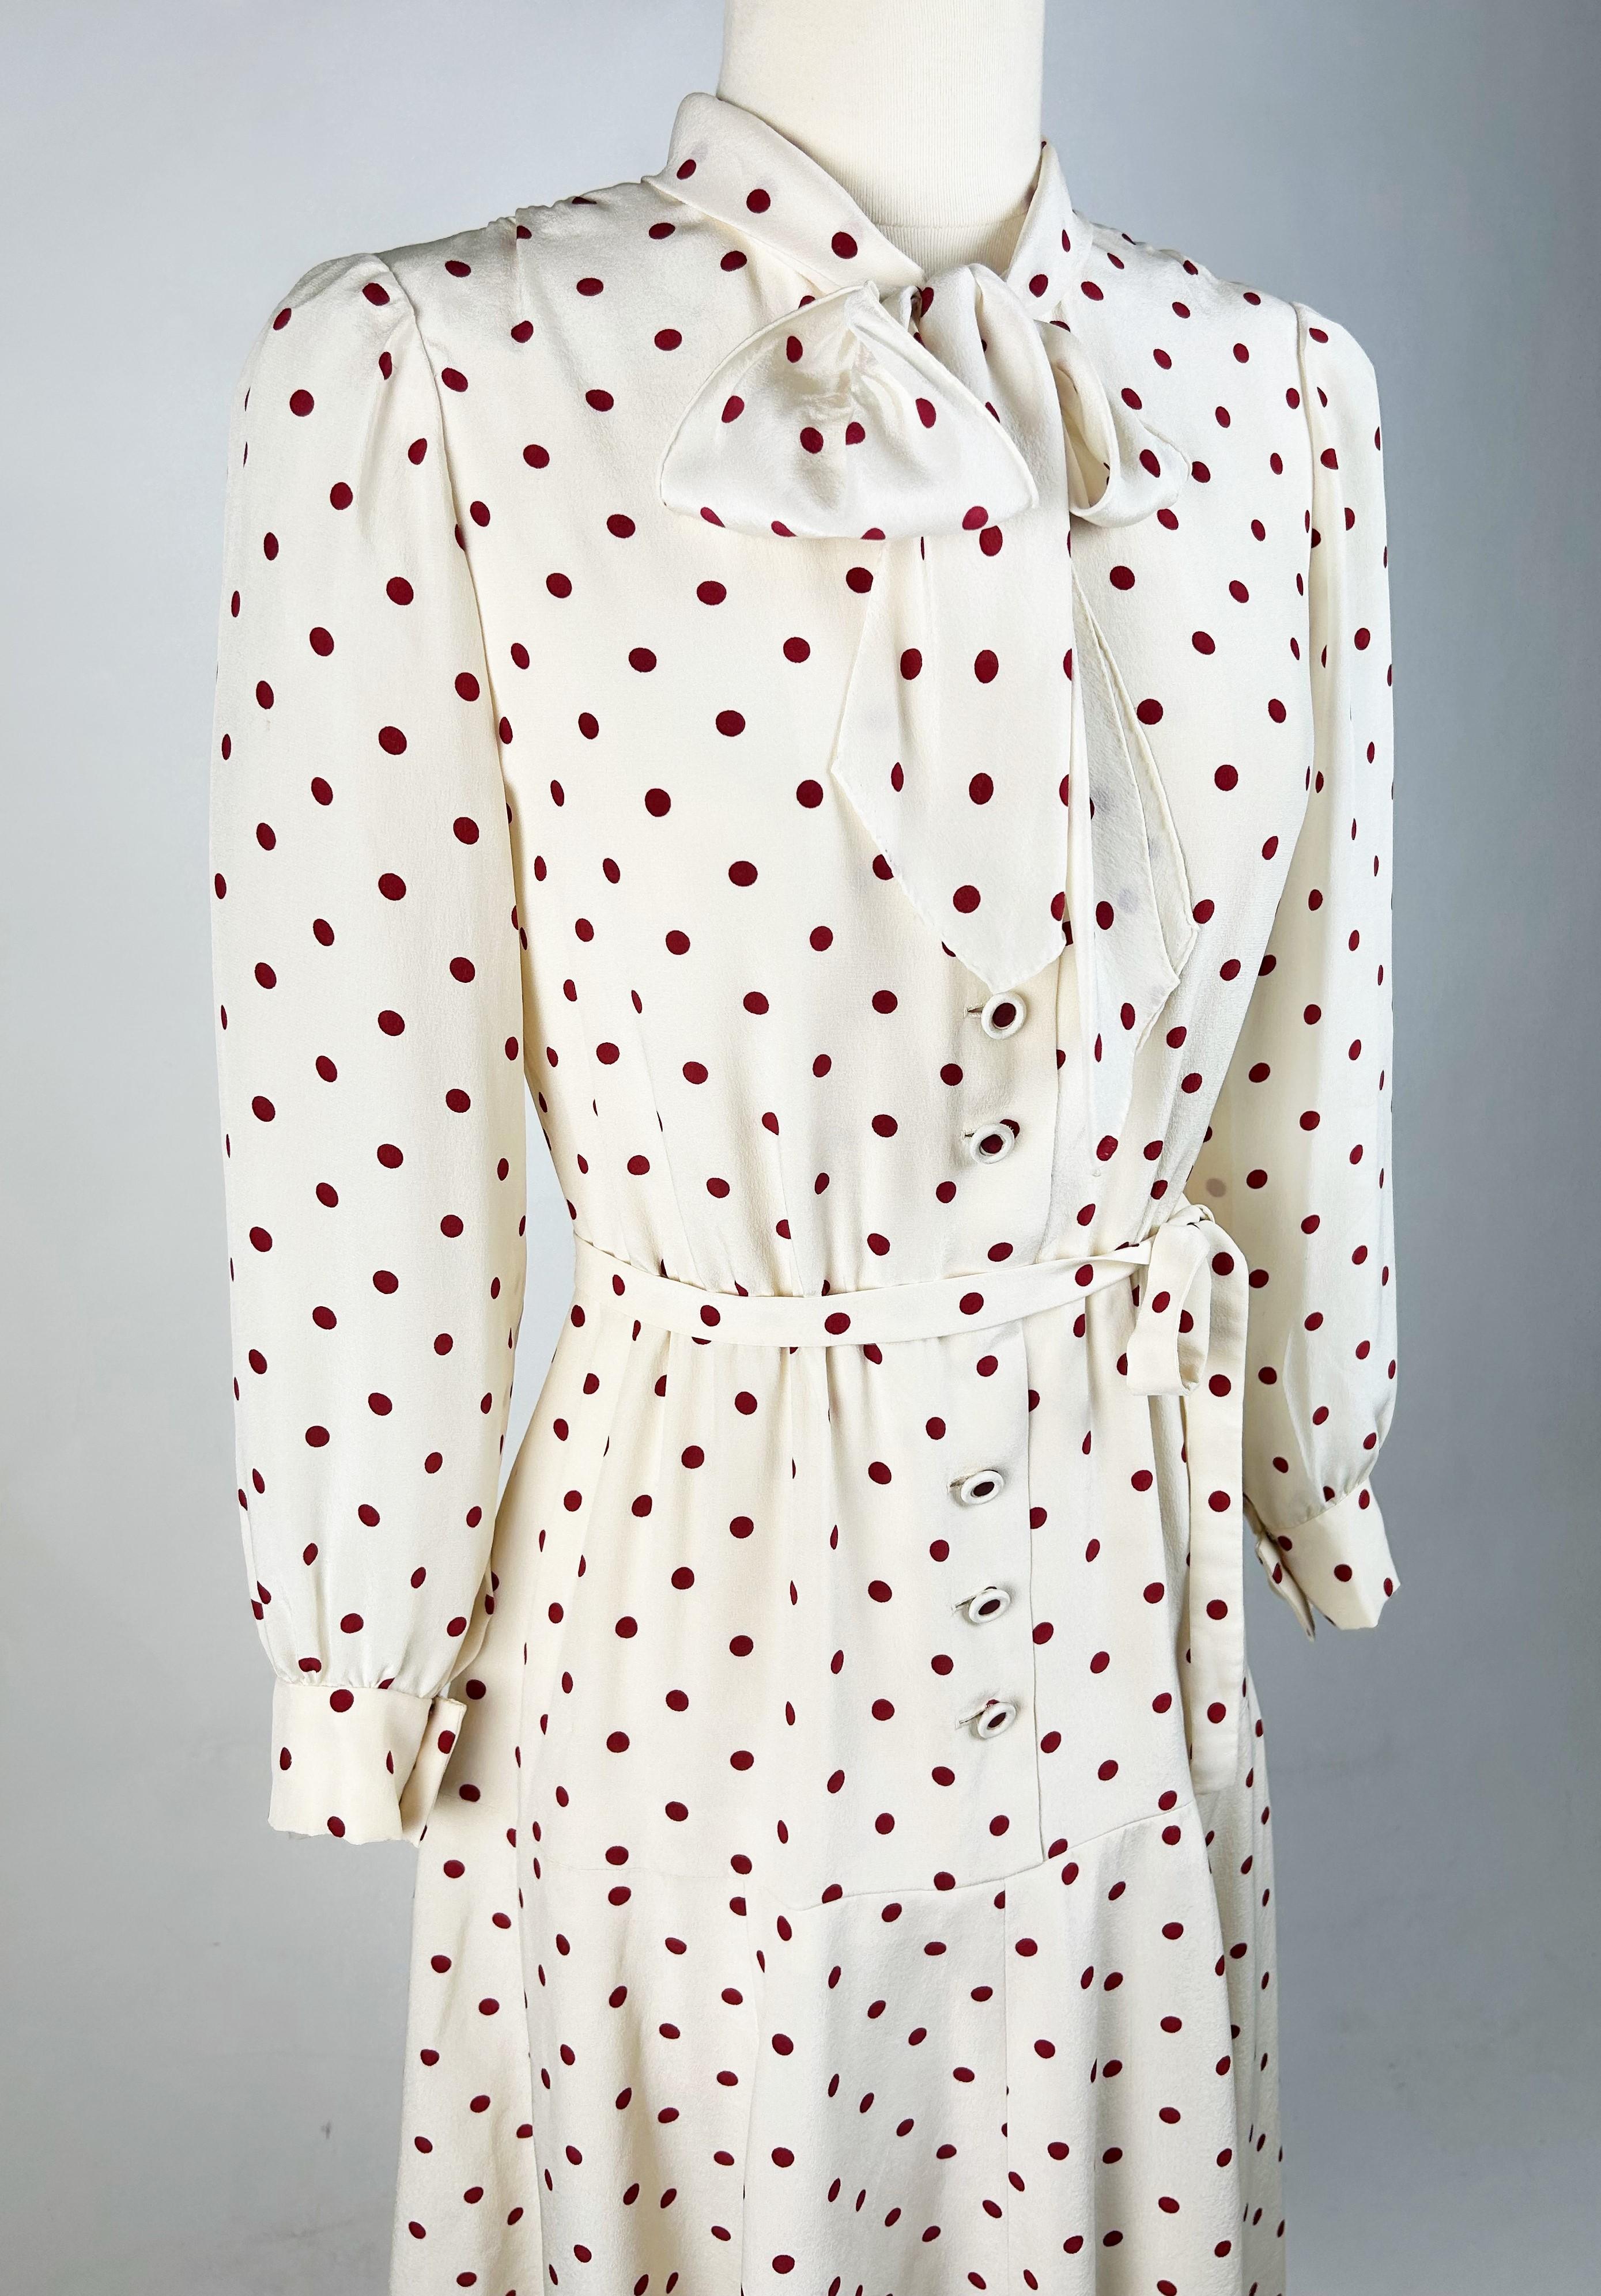 Circa 1970-1980
France
Chanel Haute Couture cocktail dress numbered 59644 dating from the 1970s. Short dress, long sleeves with small puffs, in ivory silk crepe printed with deep red polka dots. Ascot collar with ganser front and nine matching